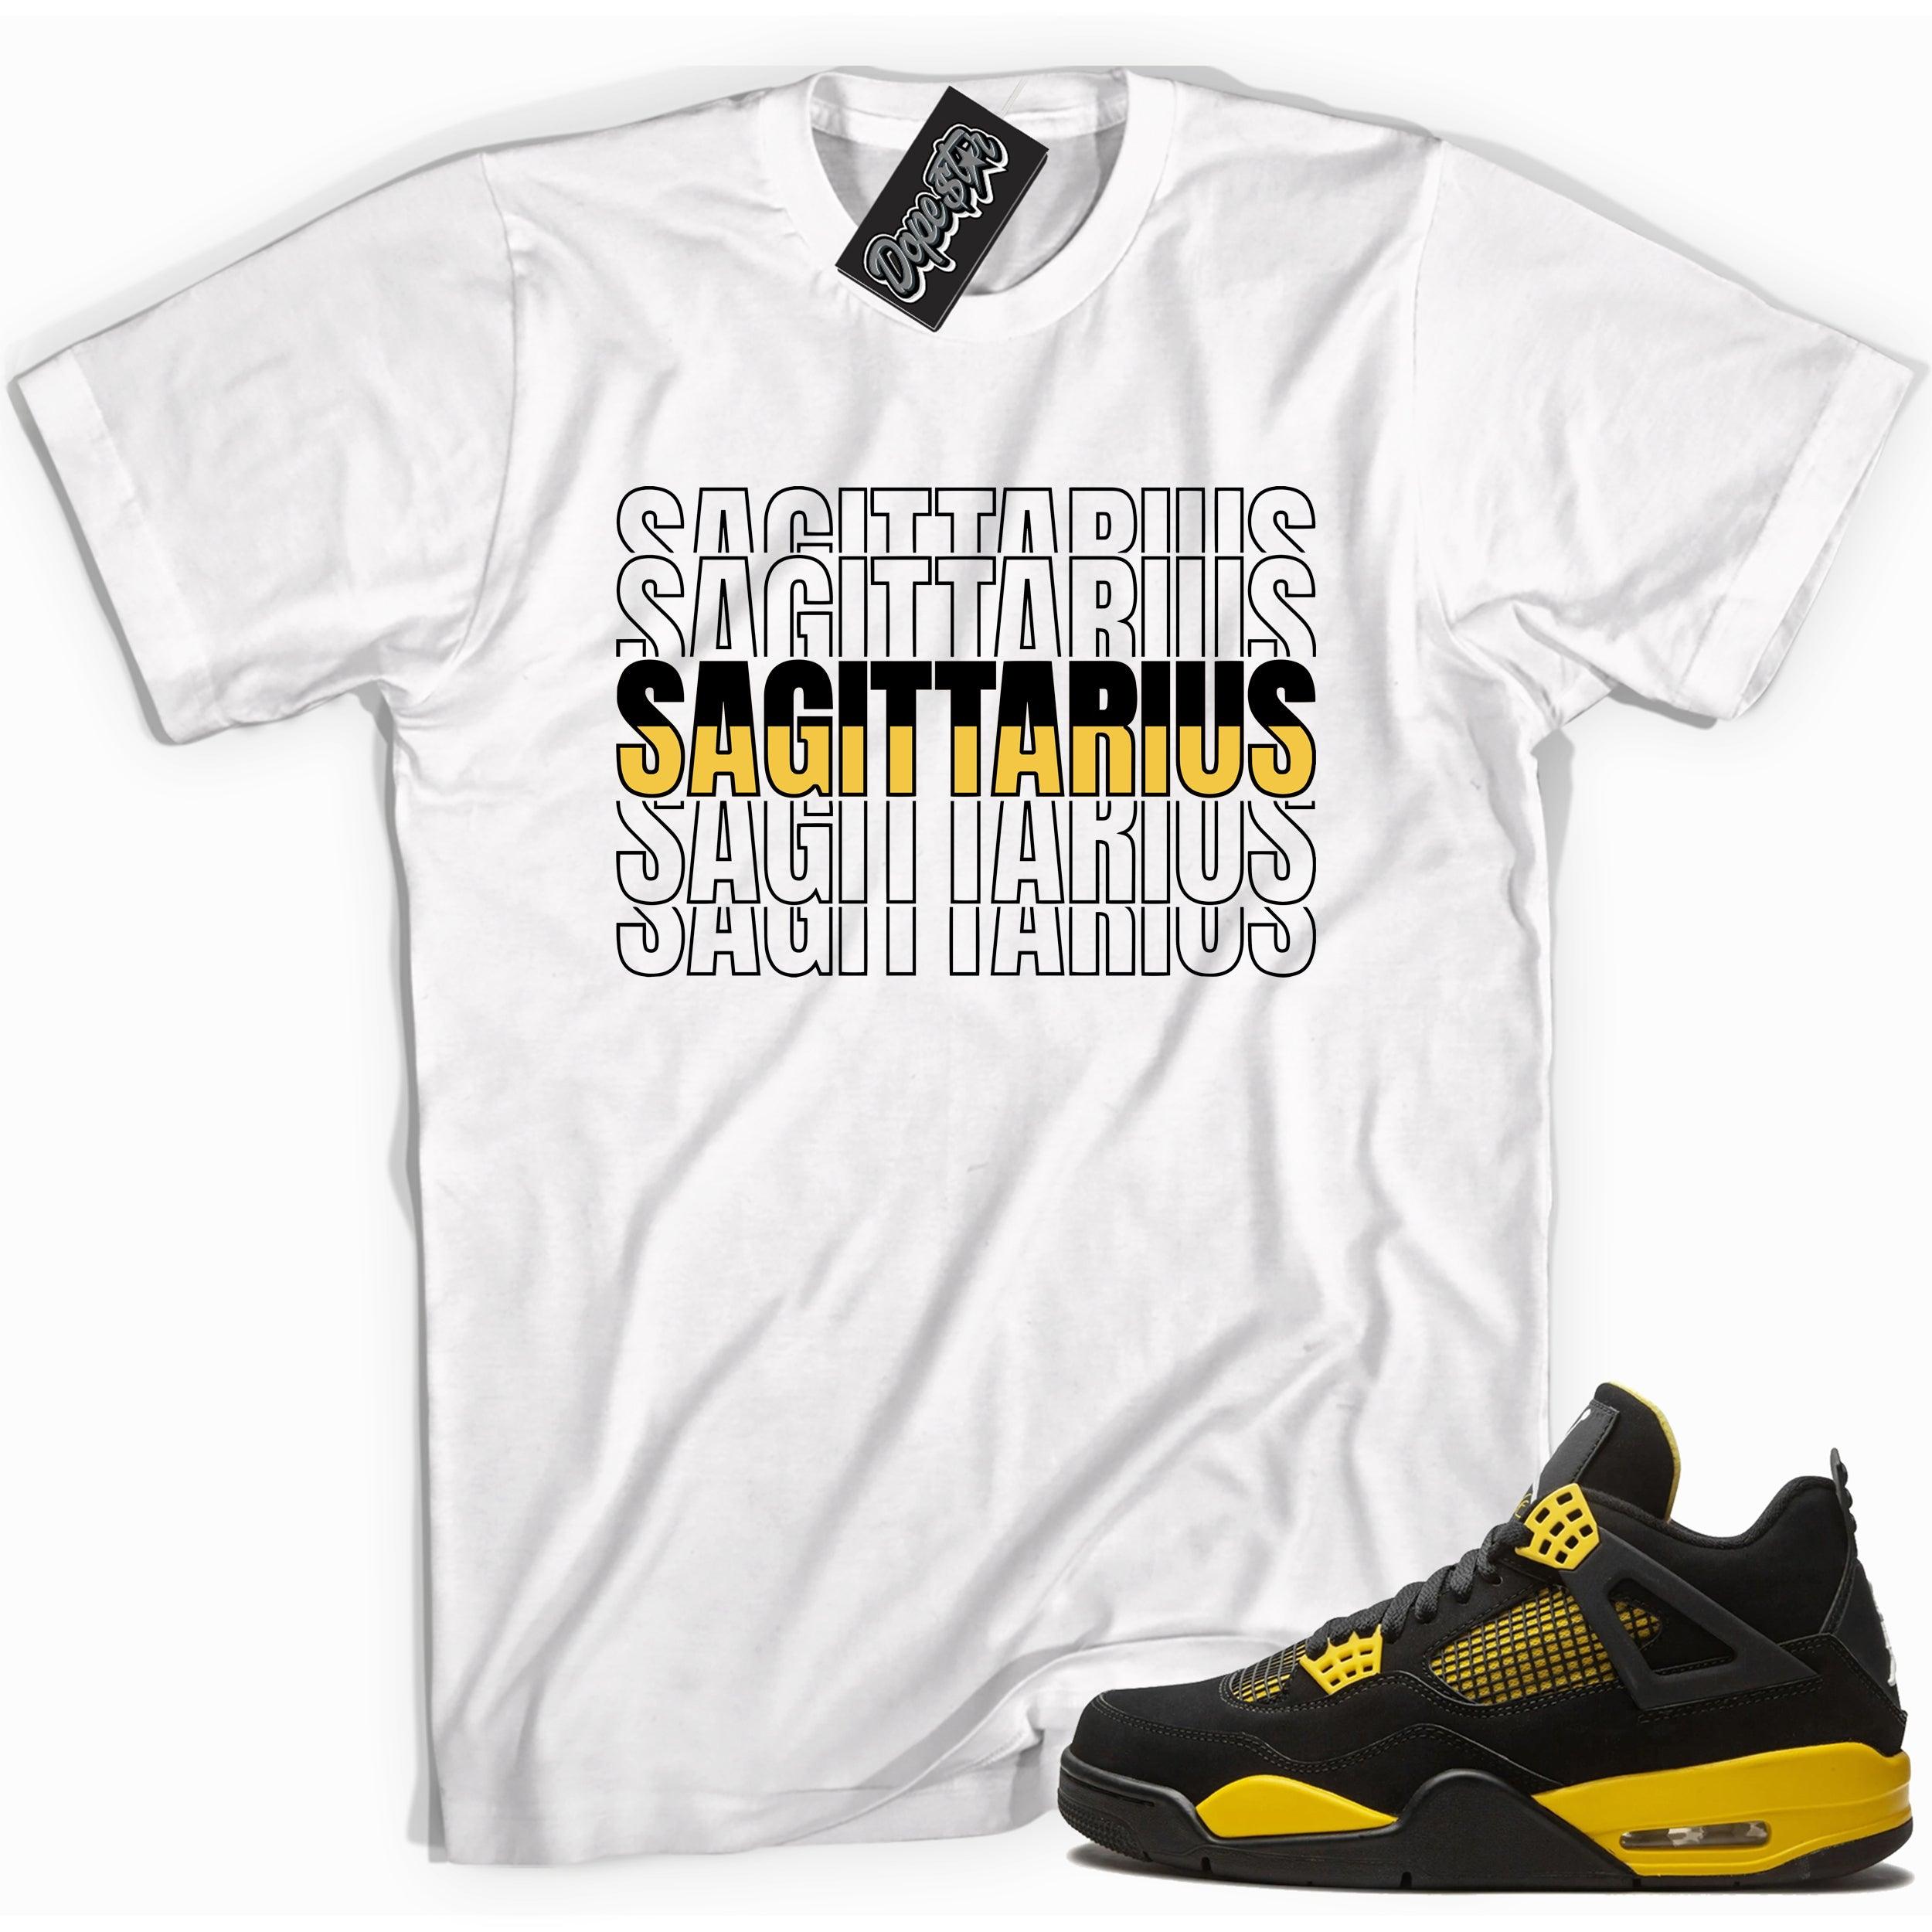 Cool white  graphic tee with 'sagittarius' print, that perfectly matches Air Jordan 4 Thunder sneakers